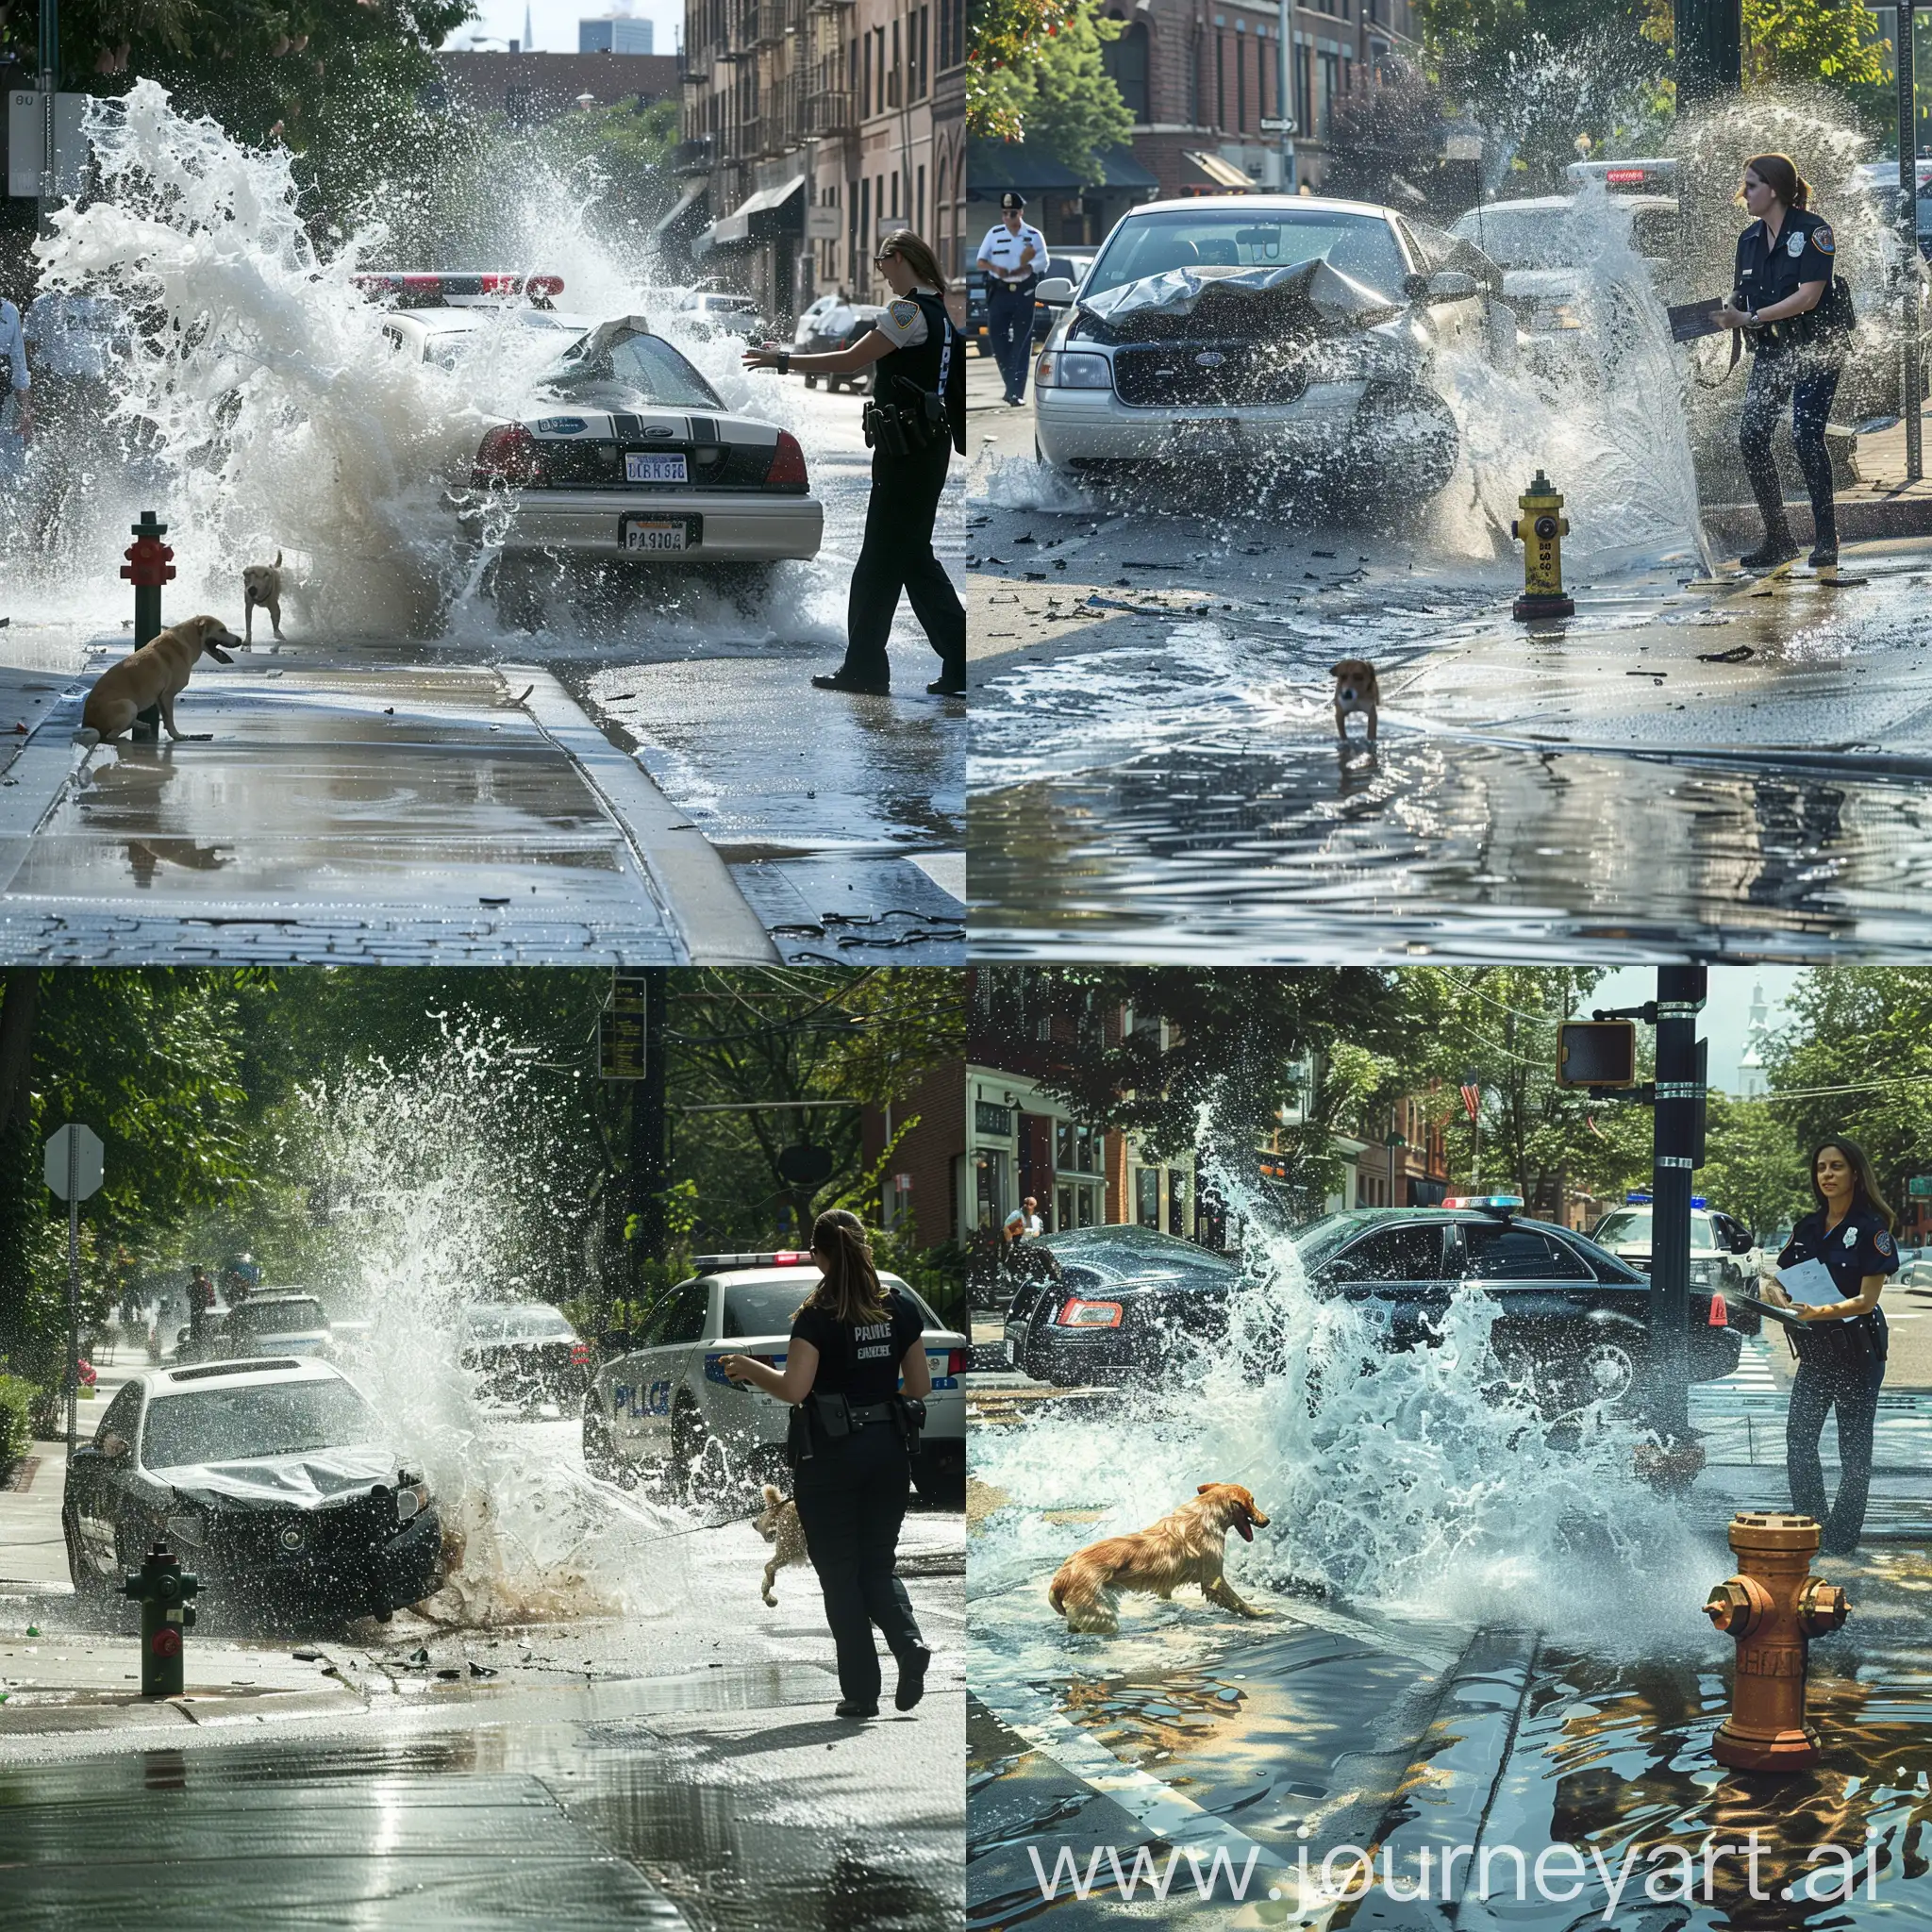 Student-Drivers-Car-Accident-Fire-Hydrant-Splash-Scene-with-Dog-and-Policewoman